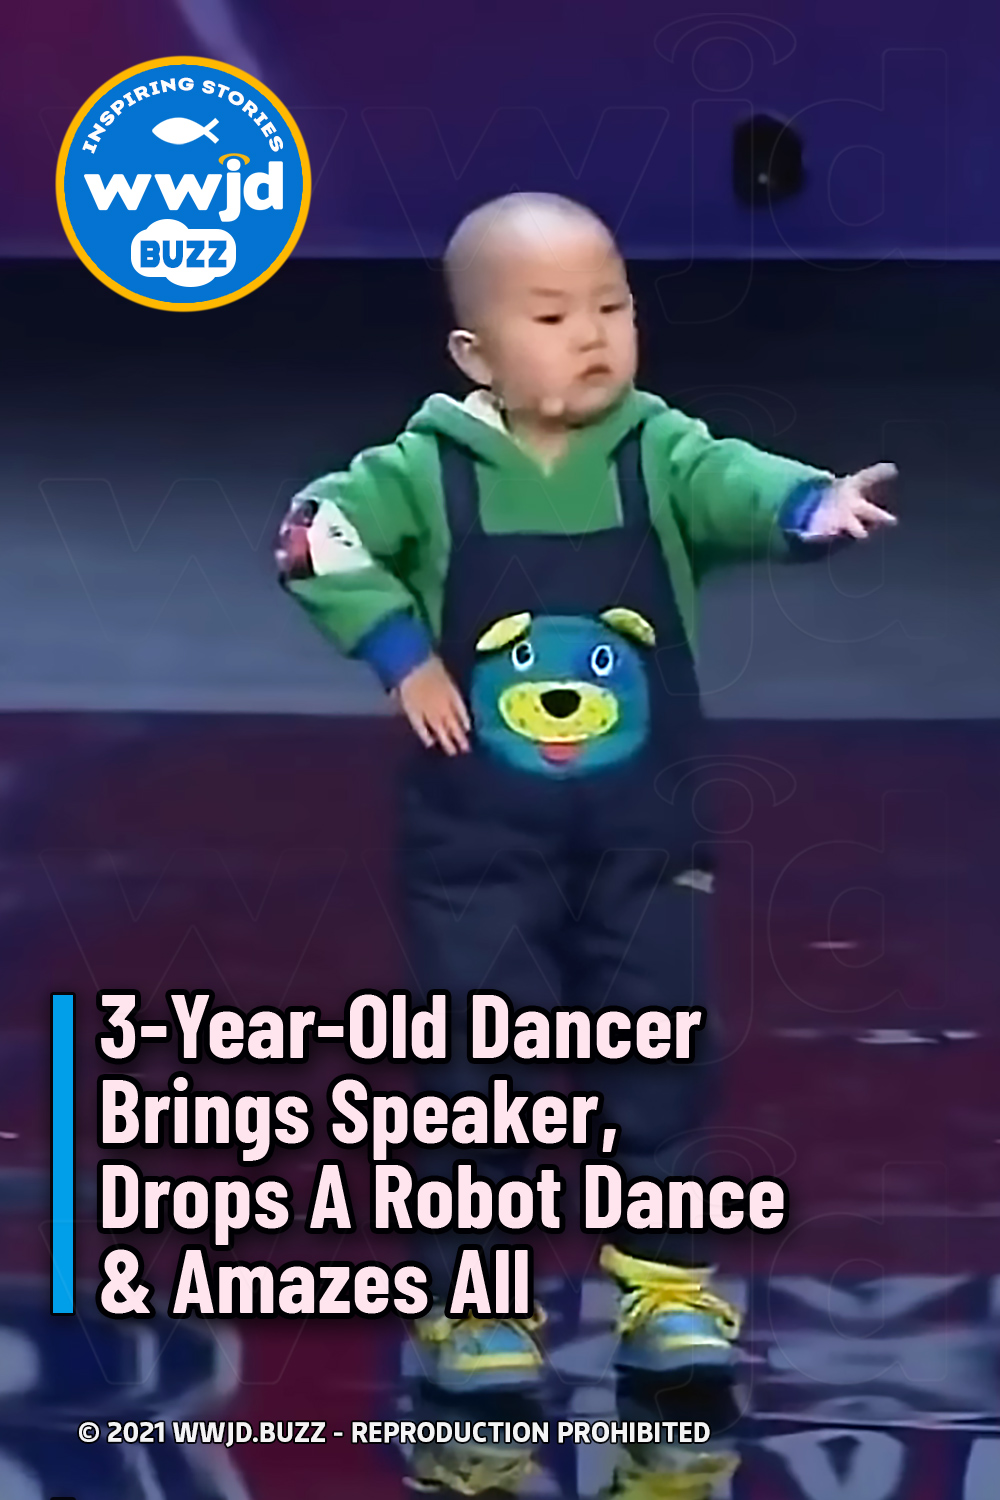 3-Year-Old Dancer Brings Speaker, Drops A Robot Dance & Amazes All